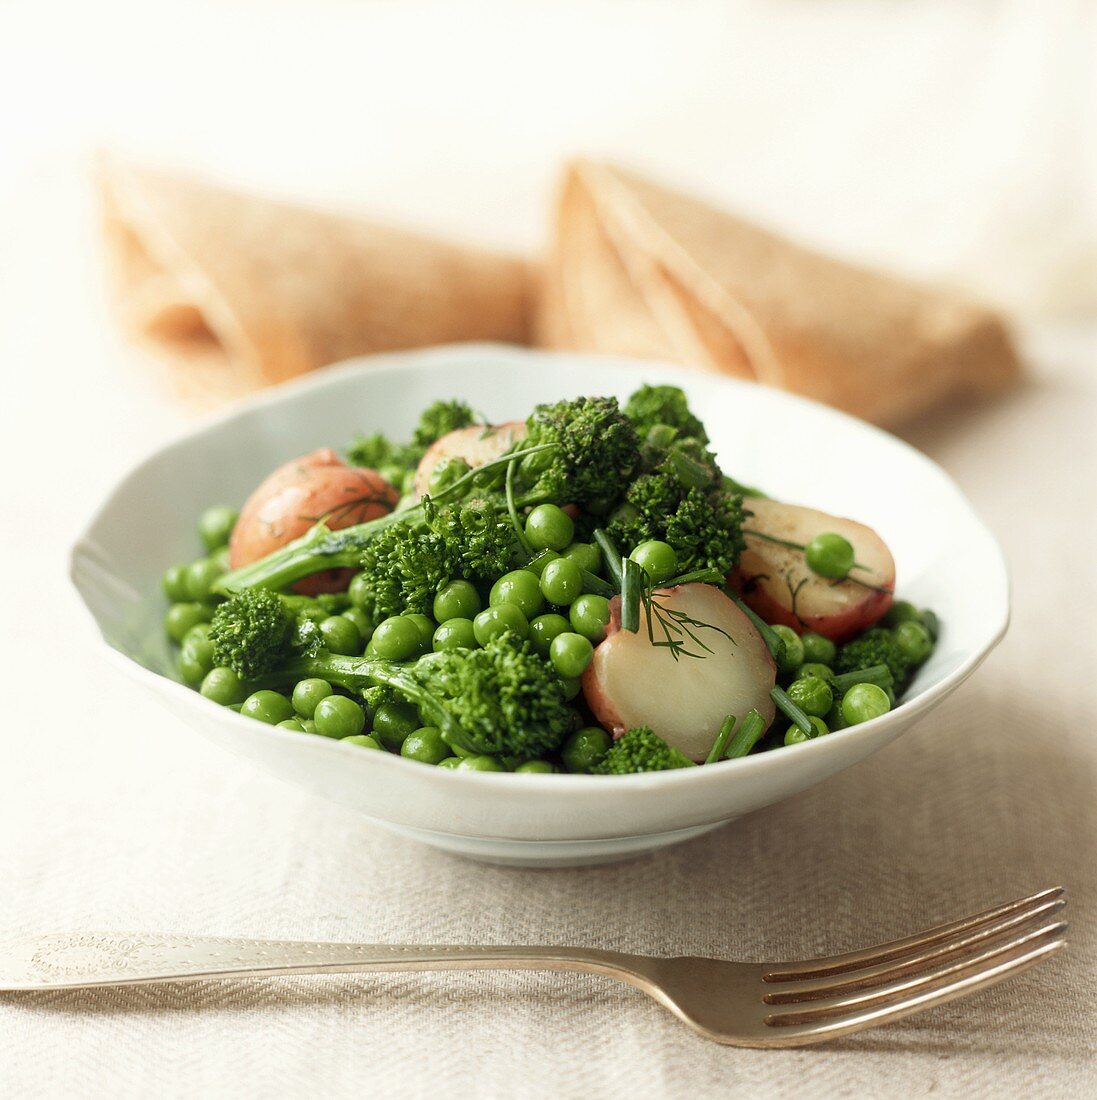 Peas, broccoli and red potatoes in white dish